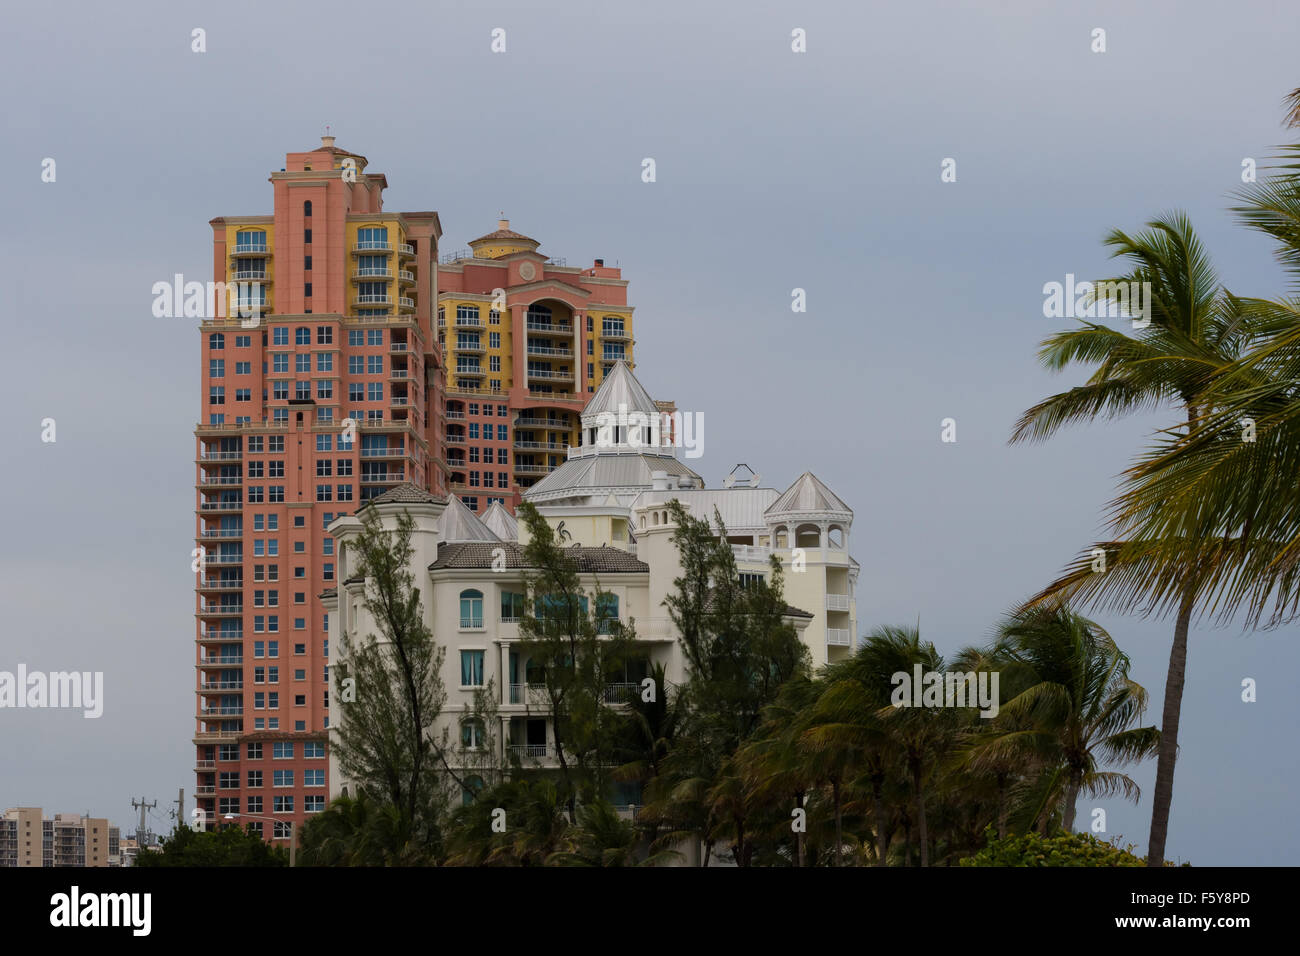 This view looking northward shows colorful hotel and condo buildings surrounded by trees at A1A in Ft Lauderdale Beach. Stock Photo